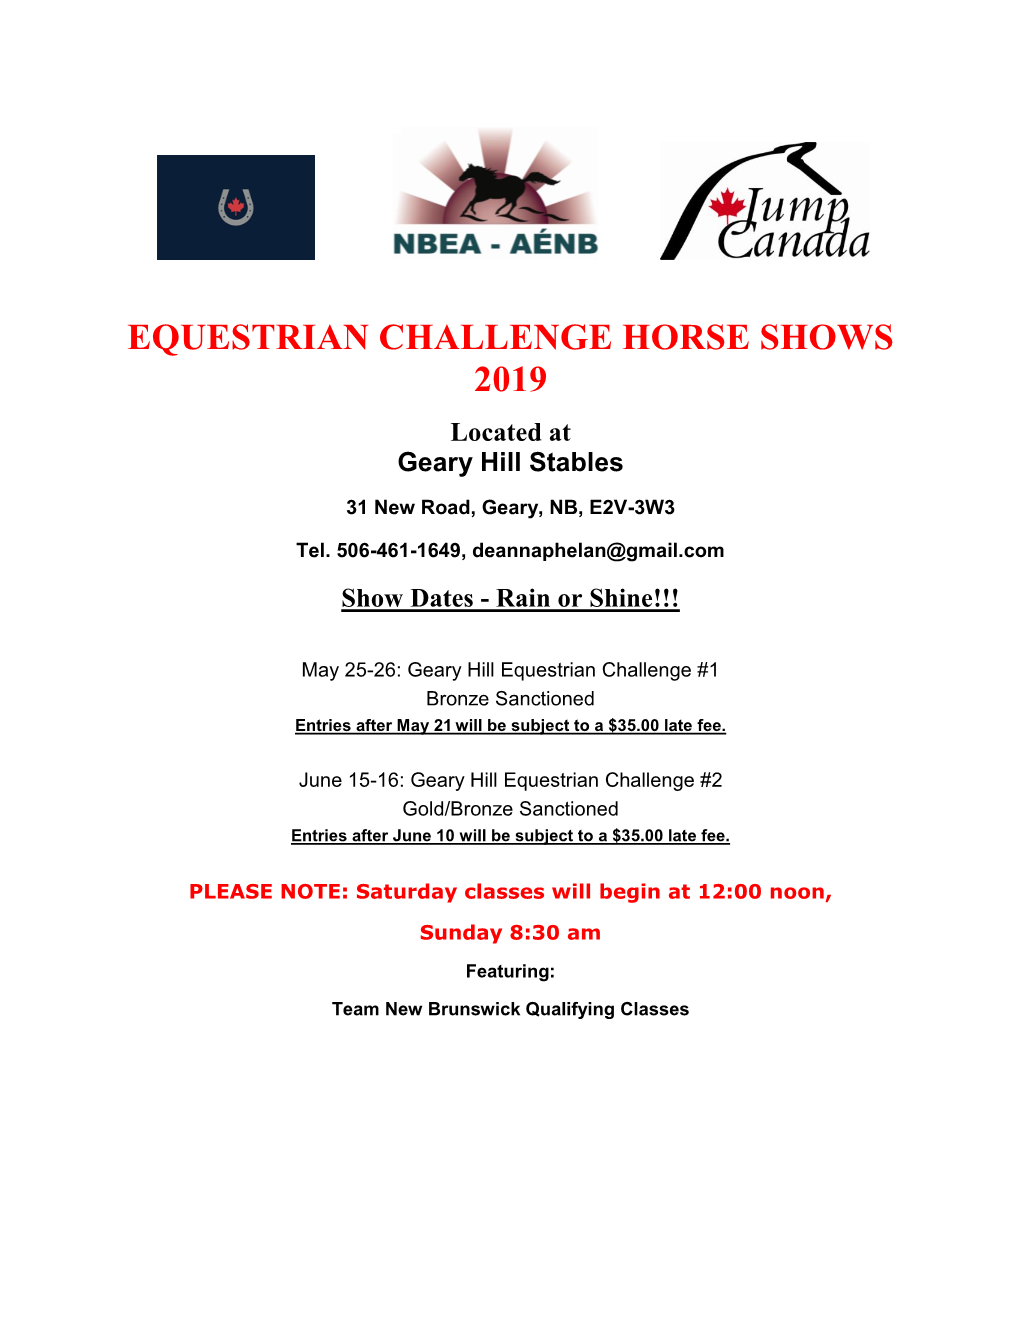 EQUESTRIAN CHALLENGE HORSE SHOWS 2019 Located at Geary Hill Stables